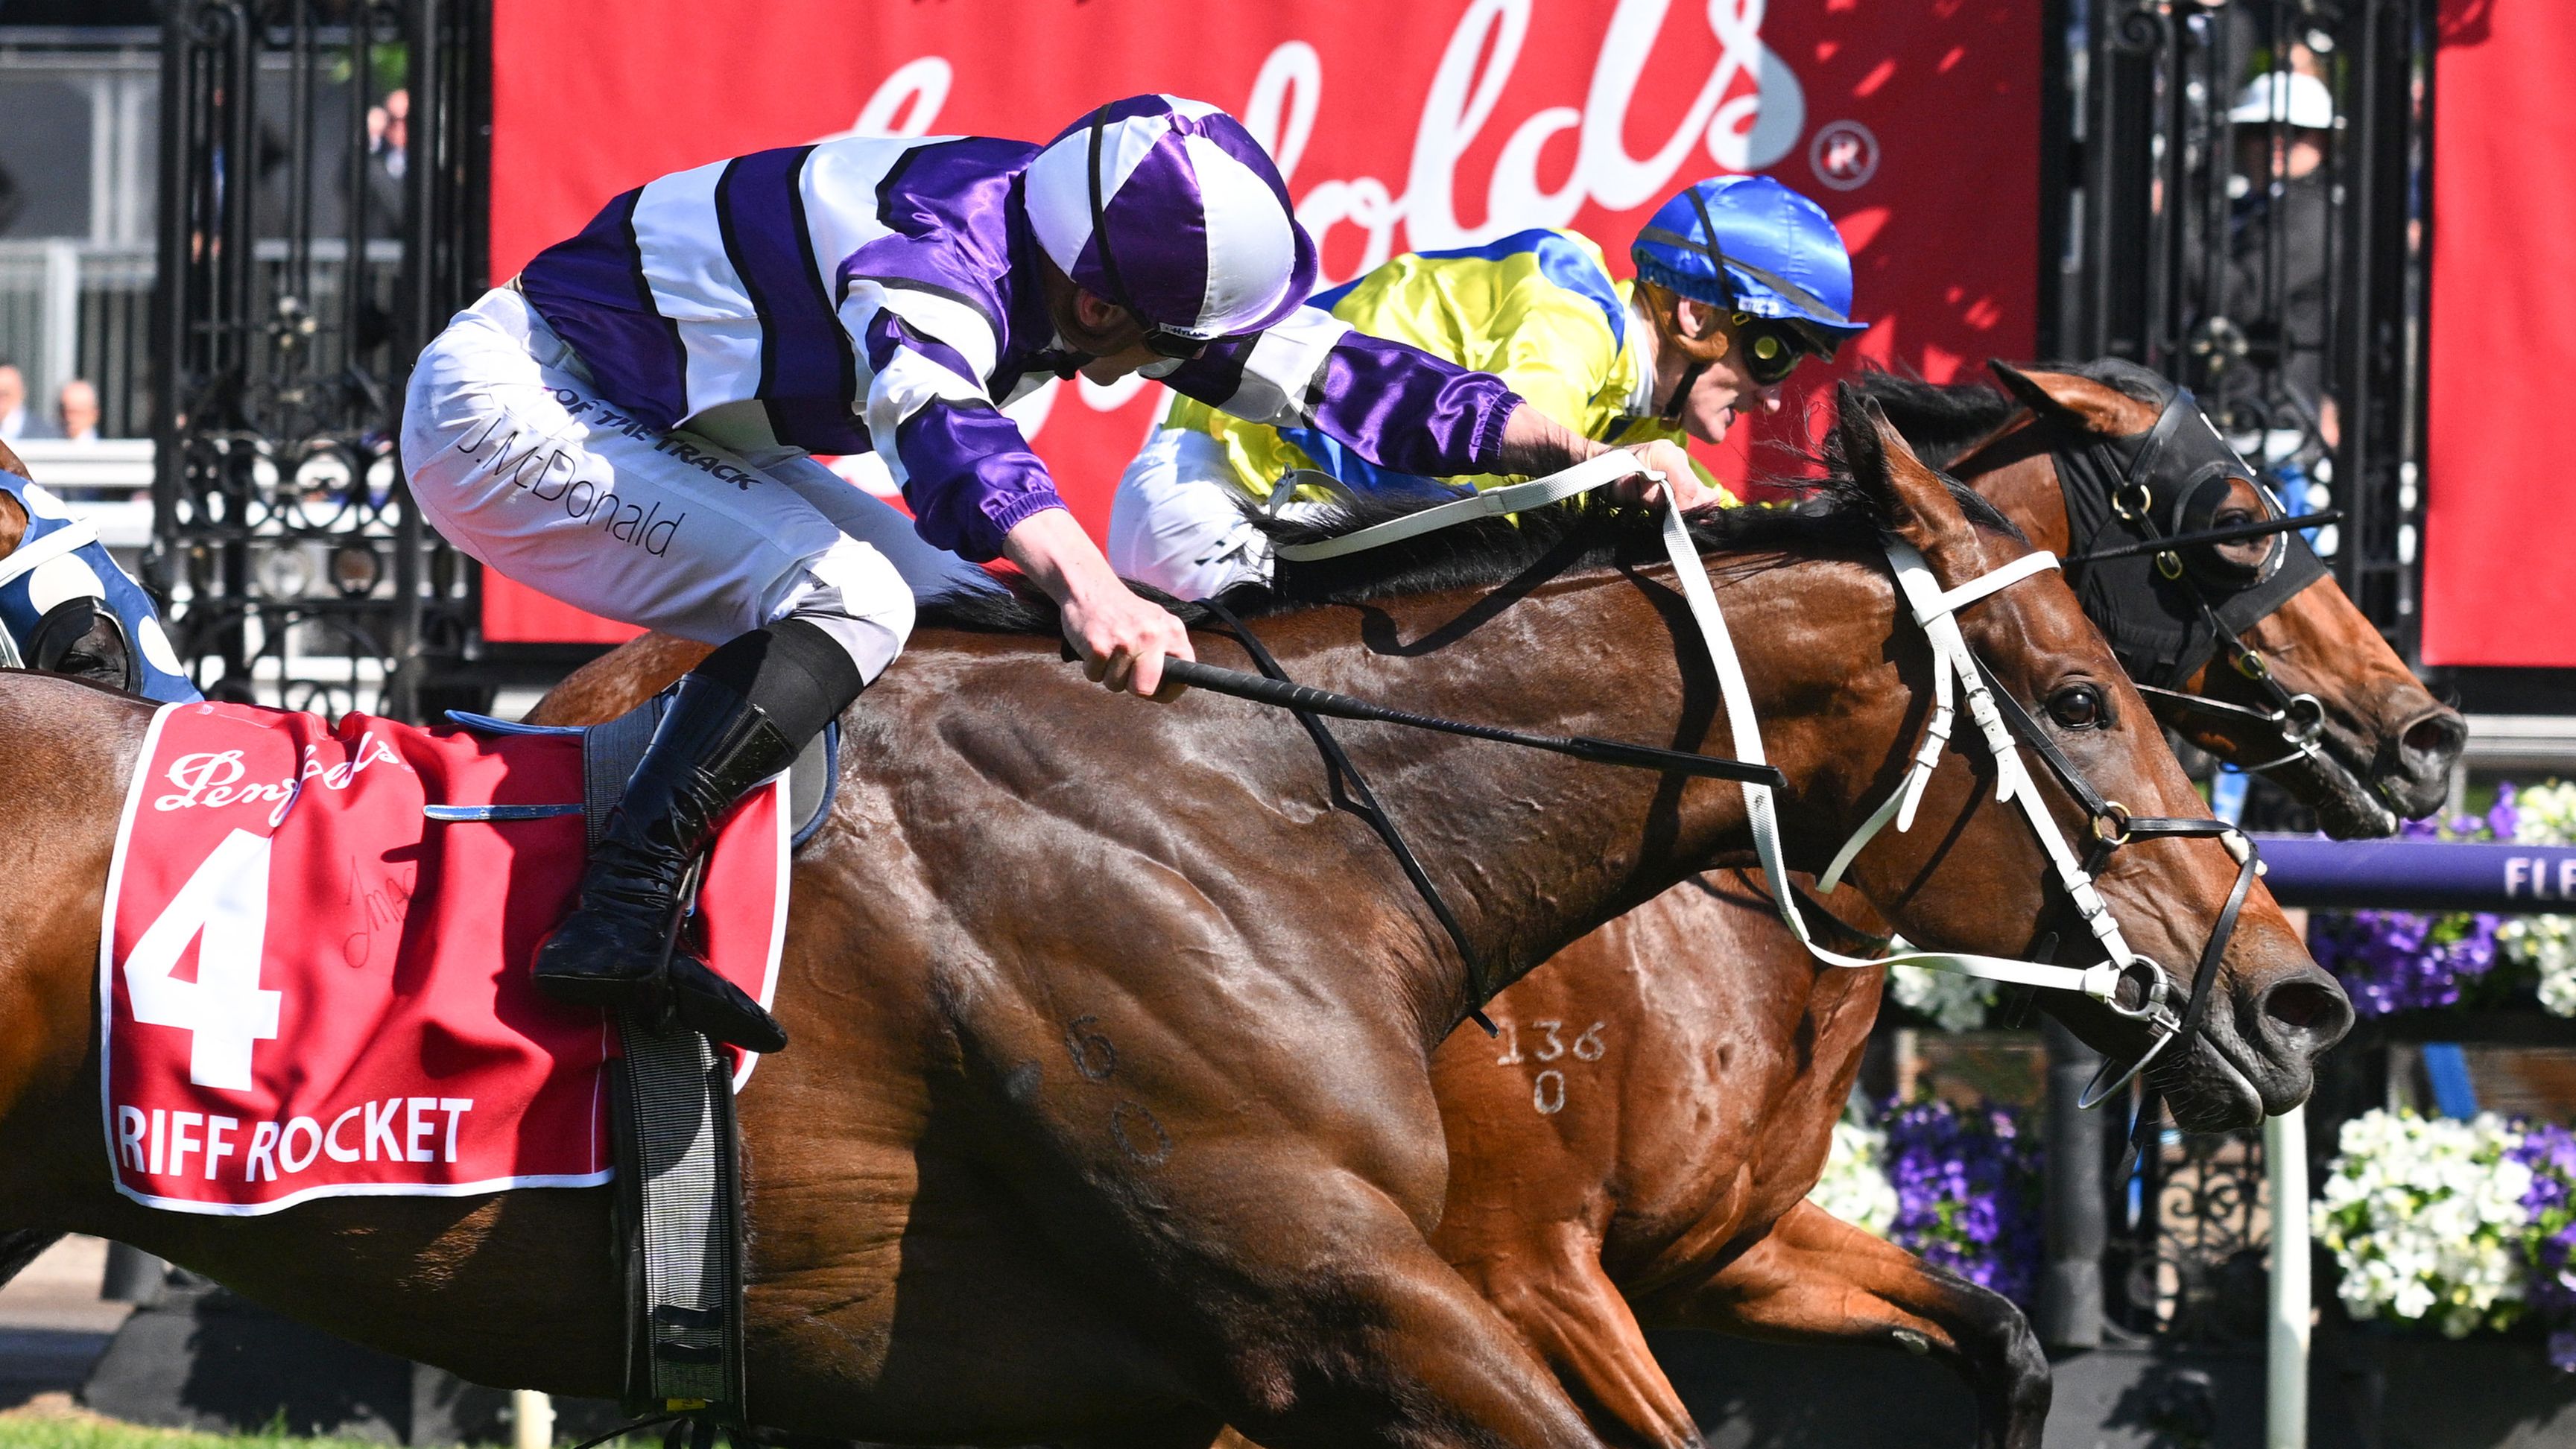 Riff Rocket takes out Victoria Derby after star jockey's bizarre act in photo finish